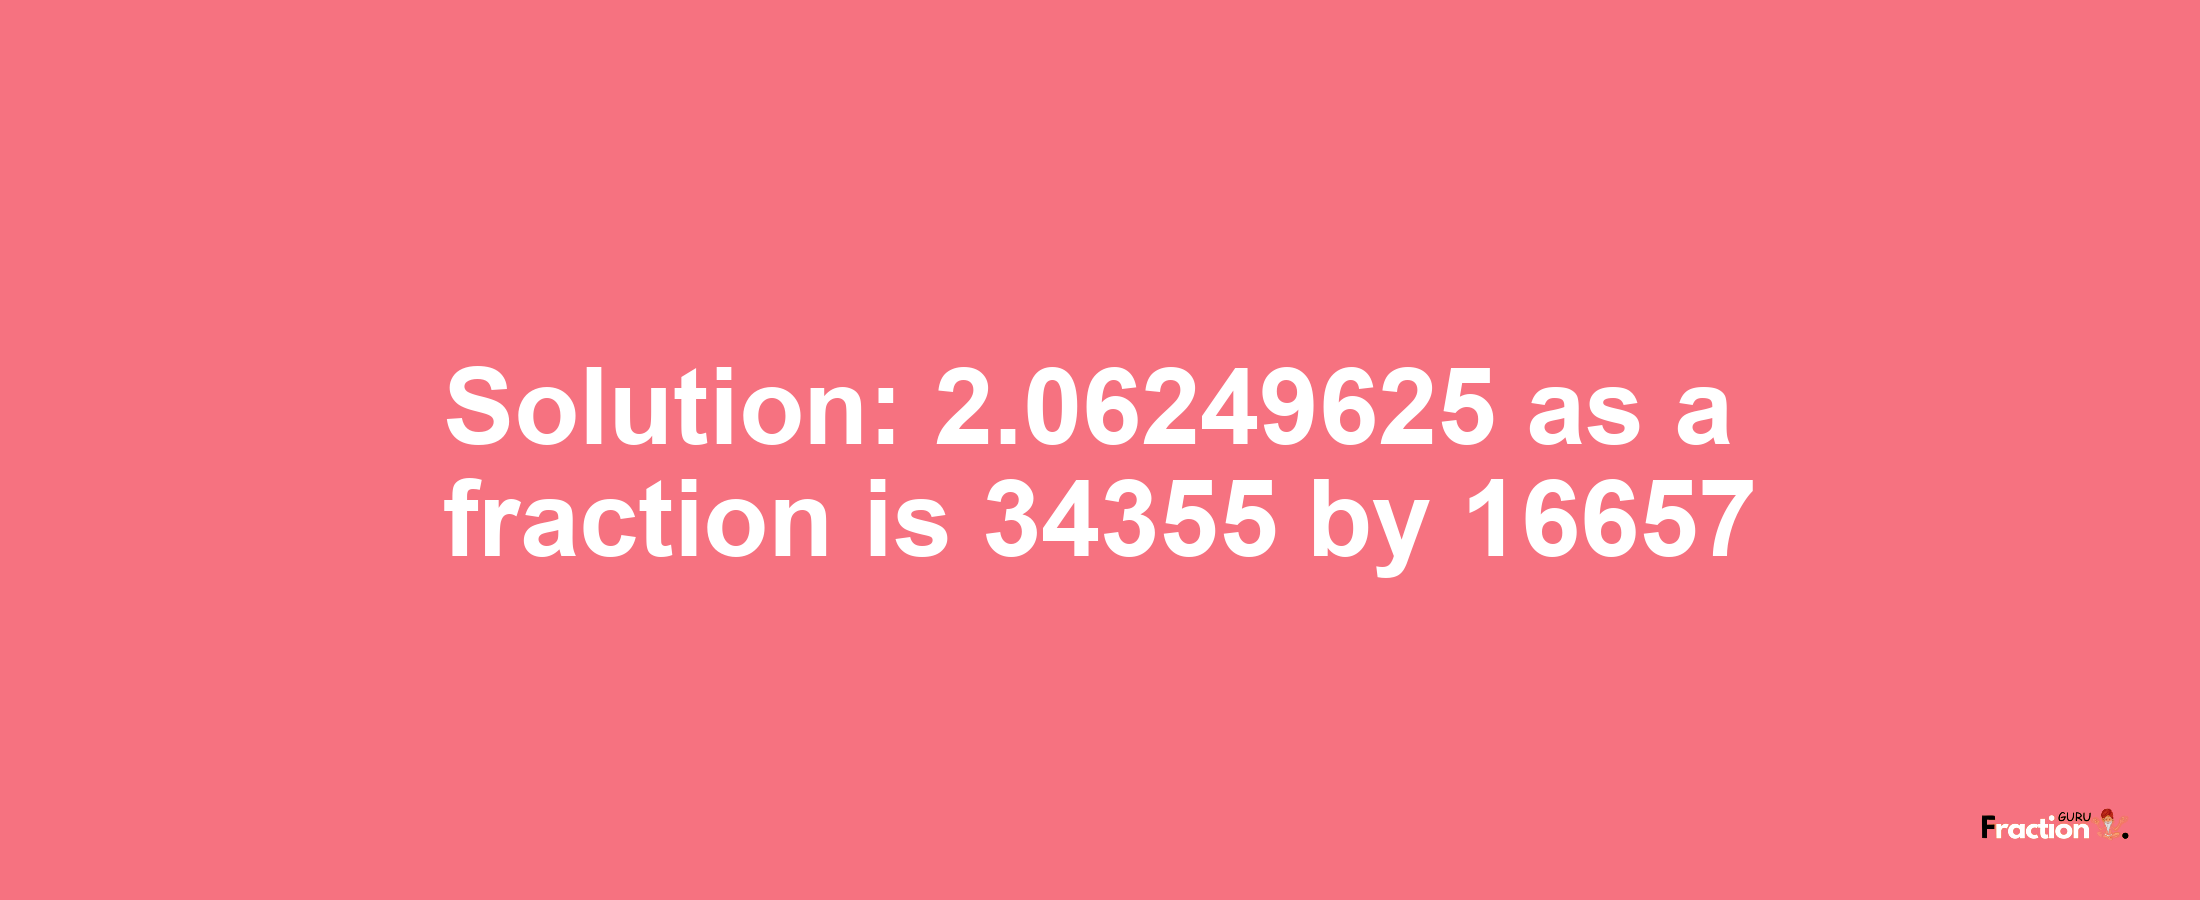 Solution:2.06249625 as a fraction is 34355/16657